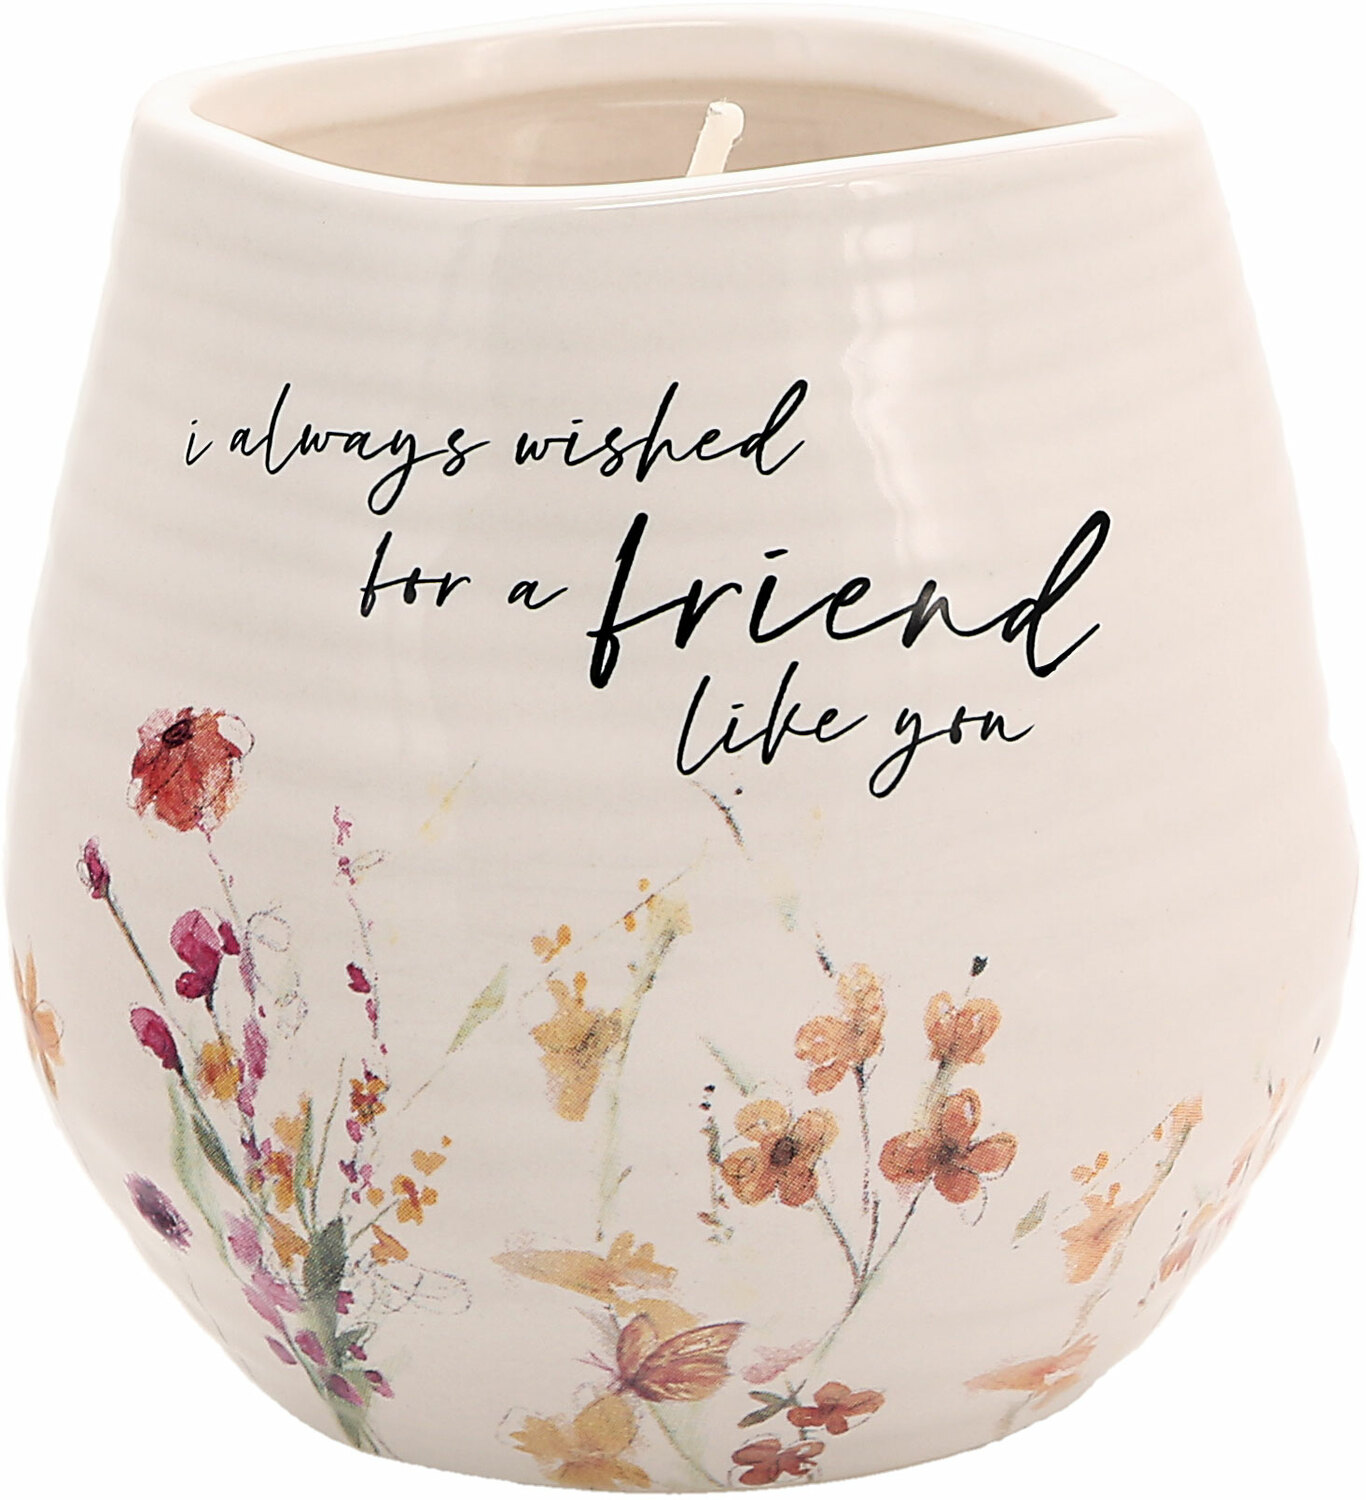 Friend by Meadows of Joy - Friend - 8 oz - 100% Soy Wax Candle
Scent: Tranquility